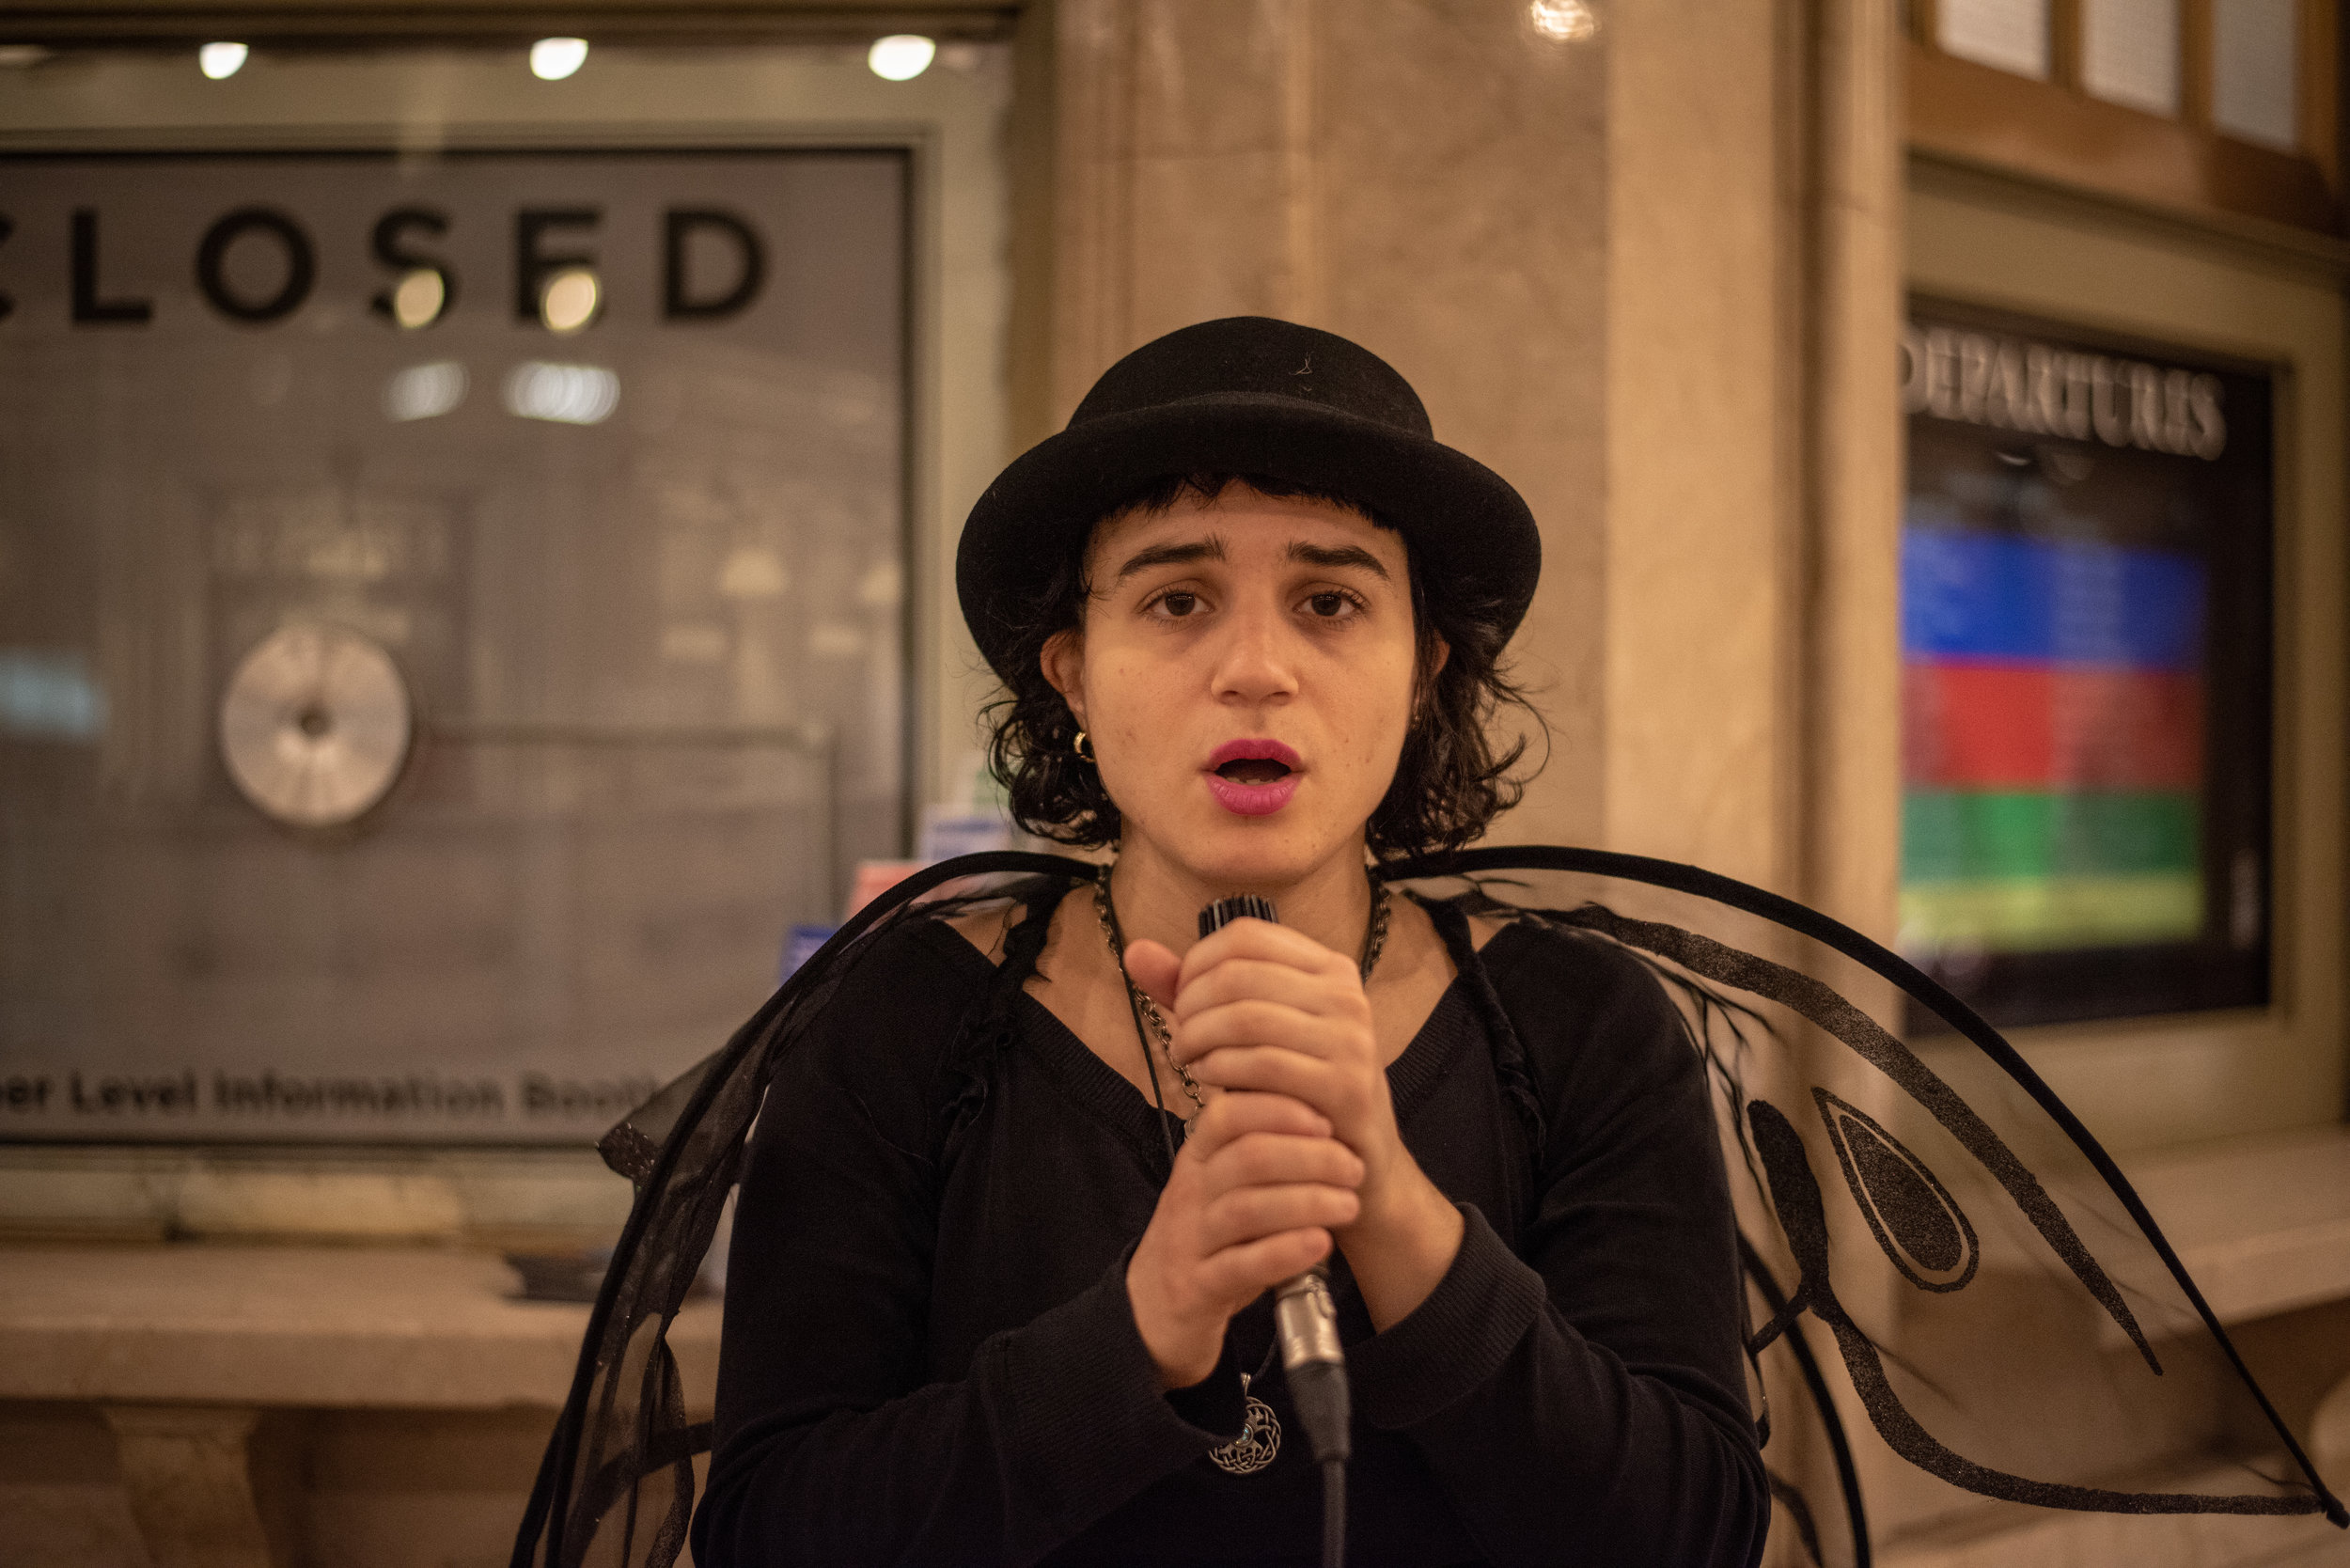  The timbre of her voice cascades through Grand Central, an angelic tune that often gathers groups of hurried commuters to stop and take notice. 